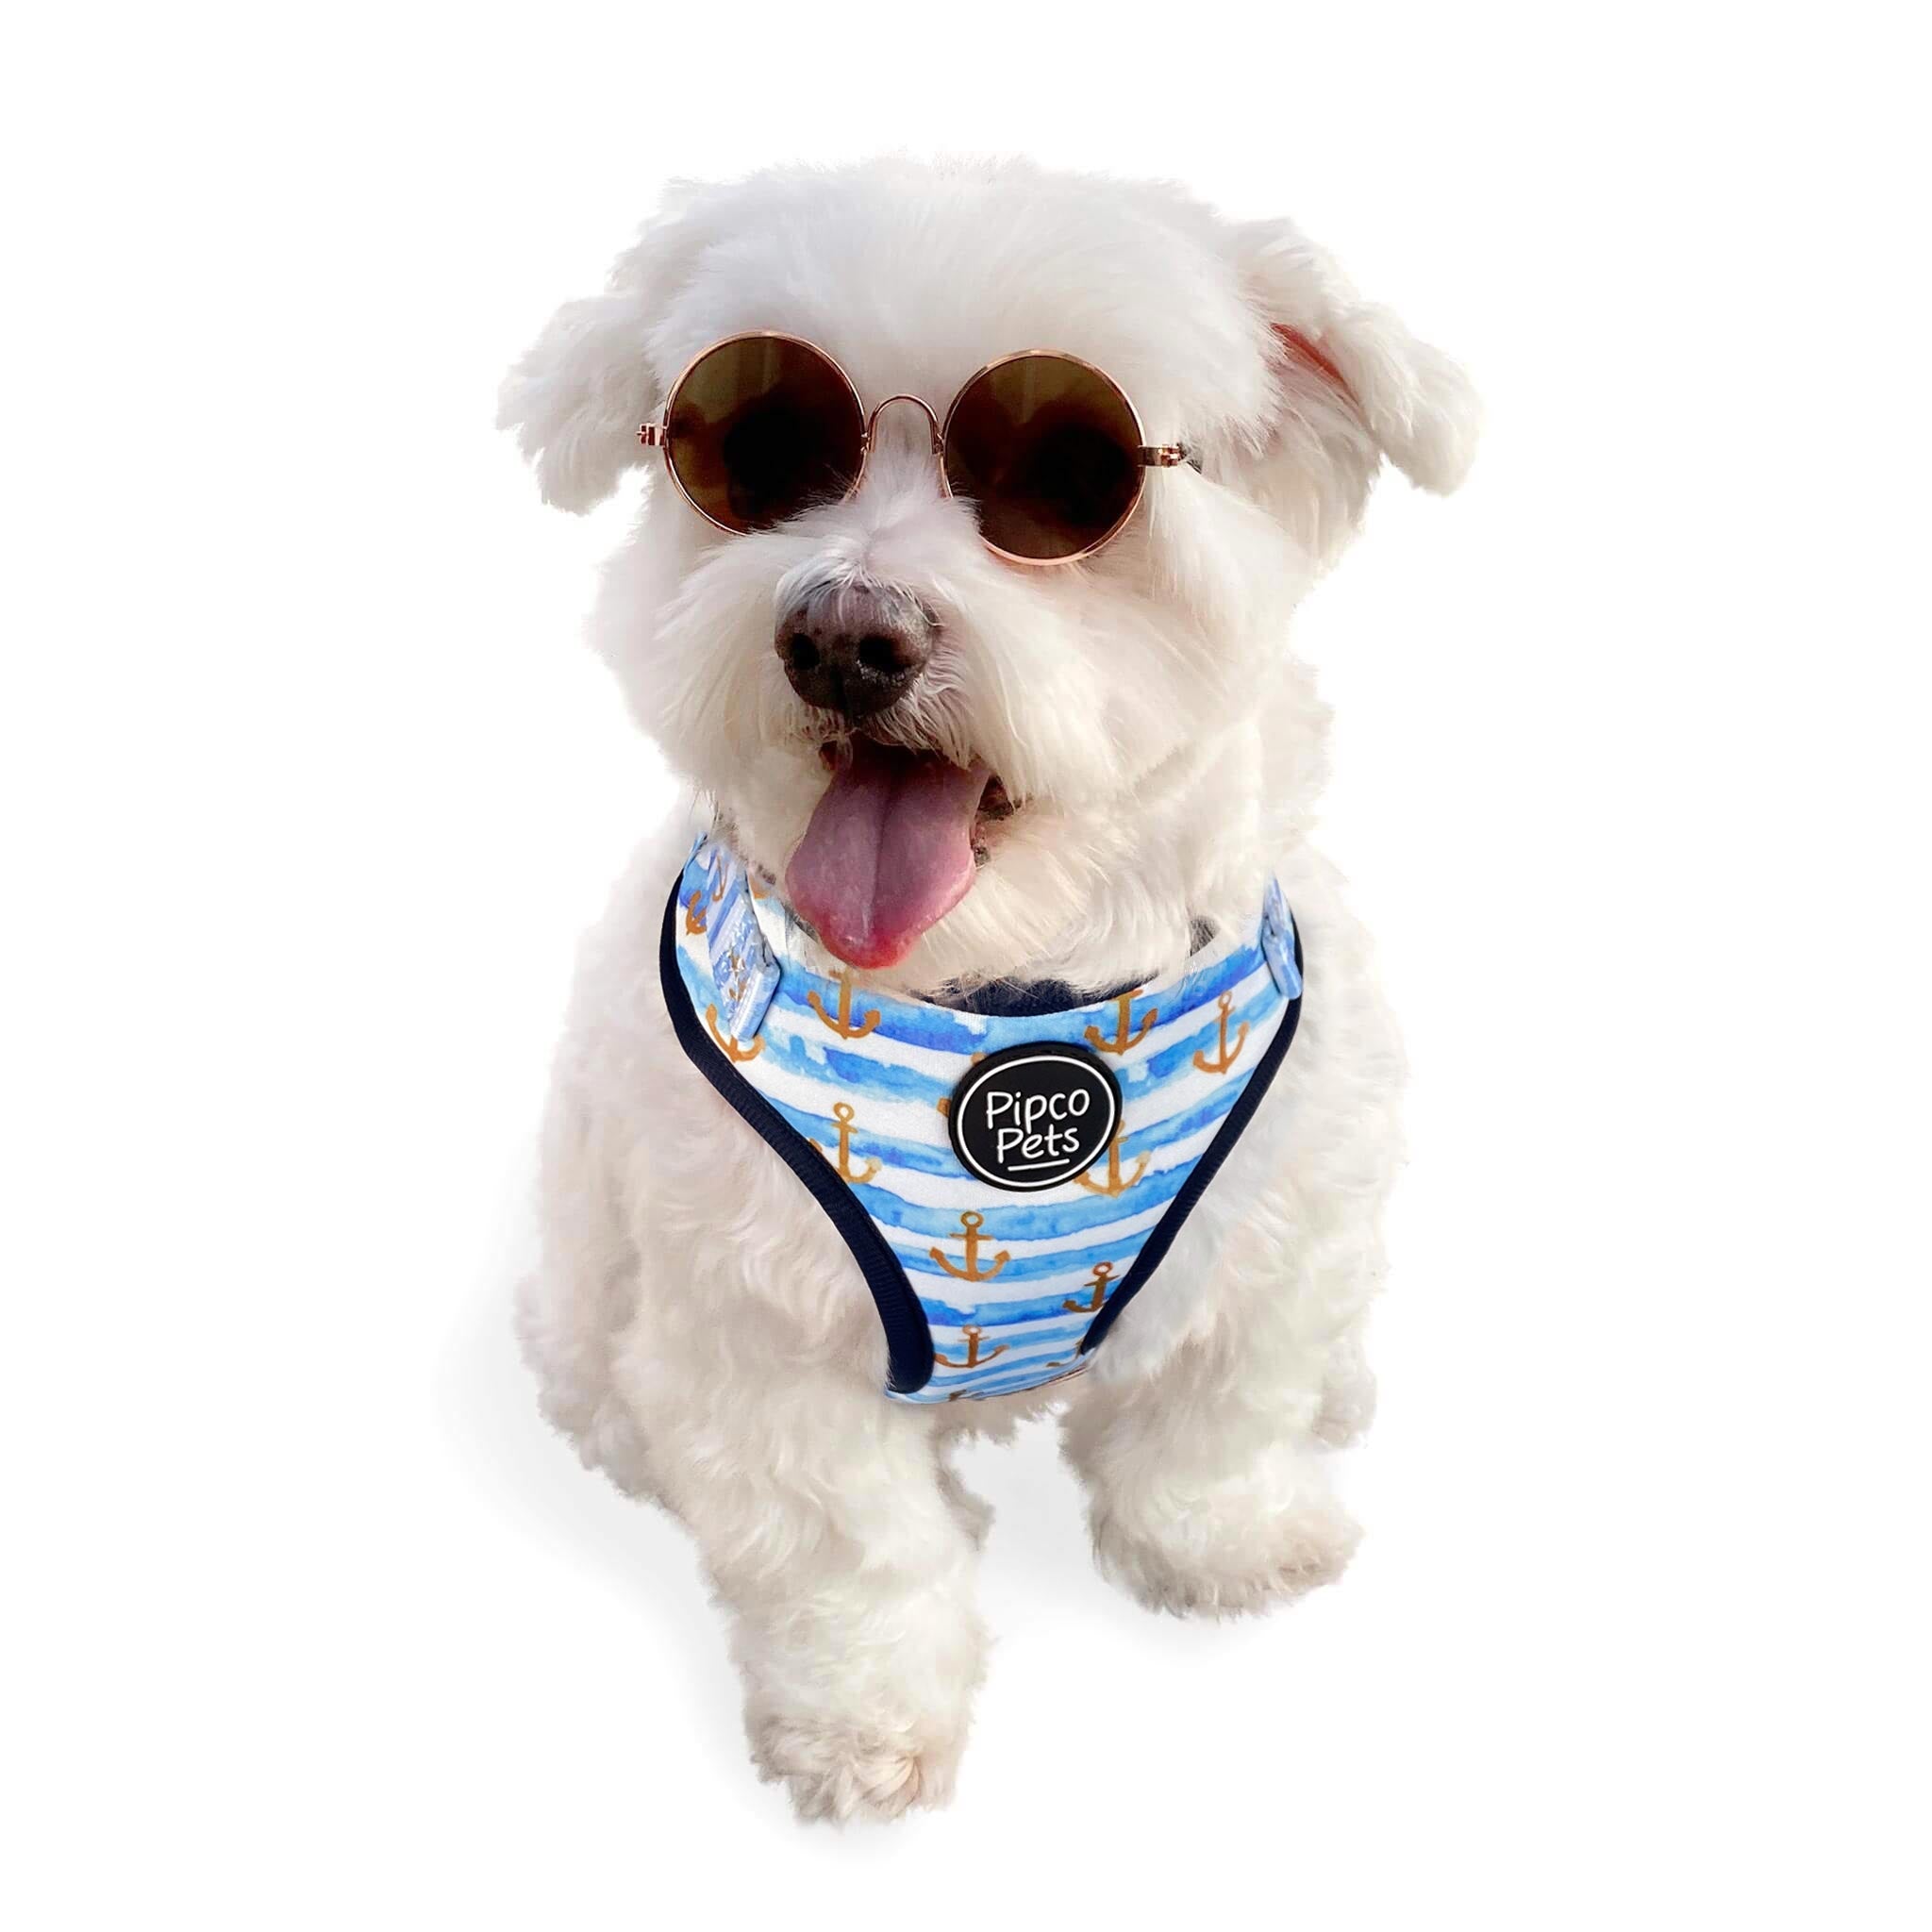 Cute dog wearing sunglasses and Pipco Pets adjustable harness with Sailor Pup anchors print pattern in blue